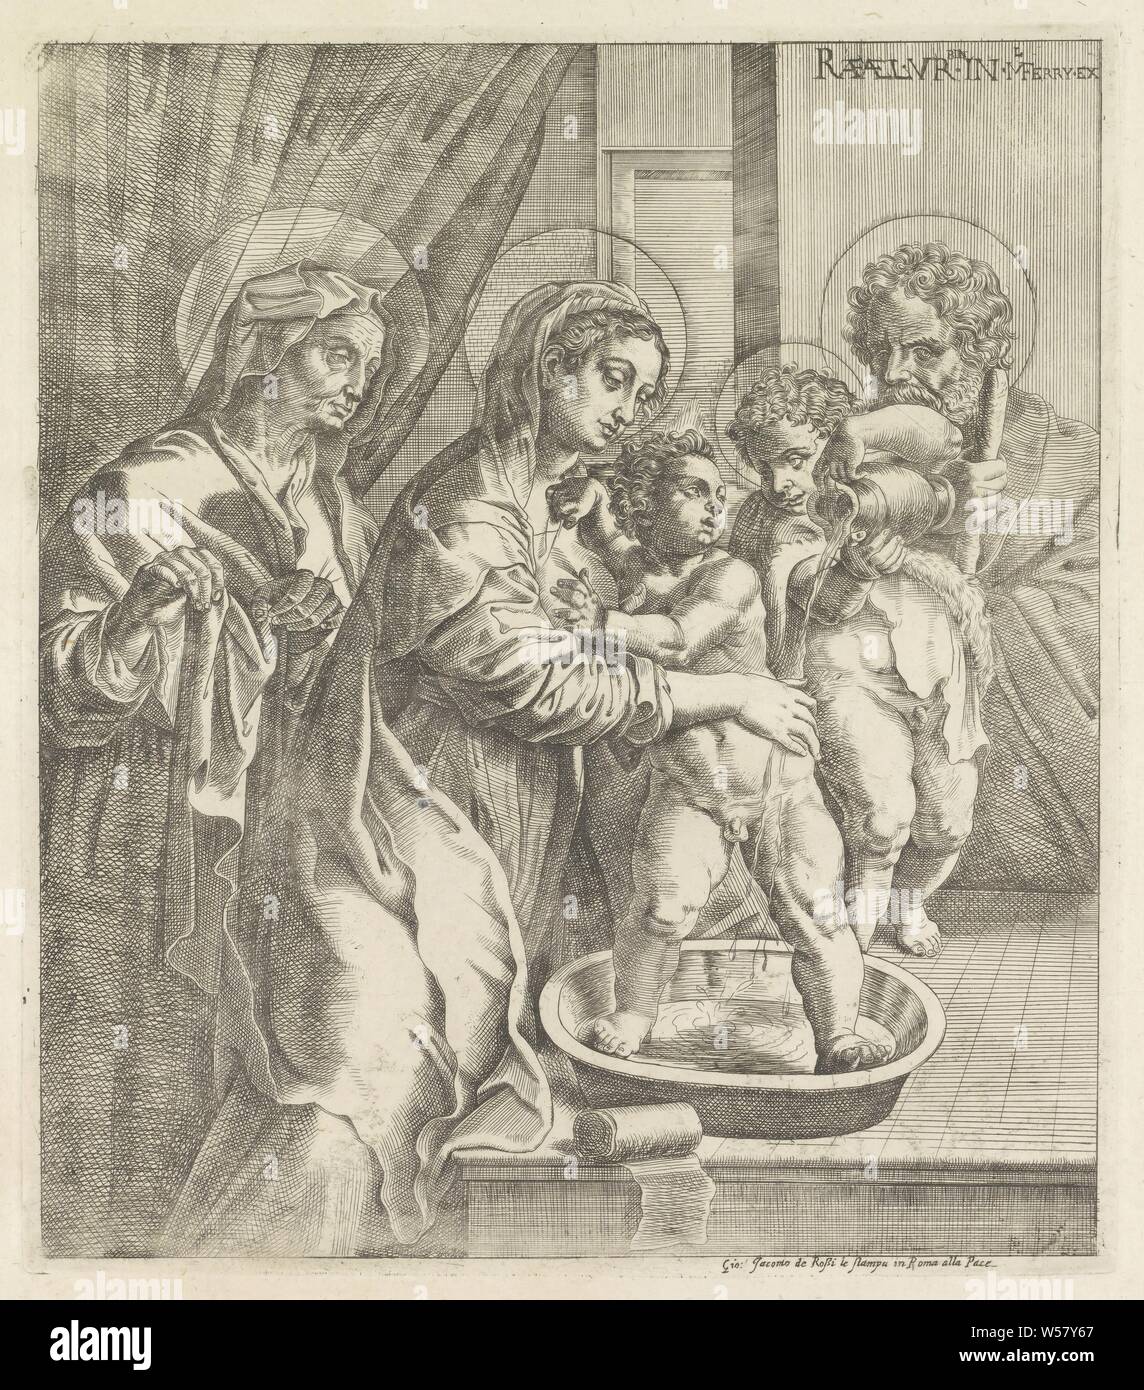 Mary and the young John the Baptist wash the Christ child, Mary and the young John the Baptist wash the Christ child. In the background are Joseph and Elizabeth., Mary, the Christ-child and John the Baptist, Elisabeth present, washing and changing baby, Pietro Facchetti, Rome, 1637 - 1691, paper, engraving, h 298 mm × w 260 mm Stock Photo